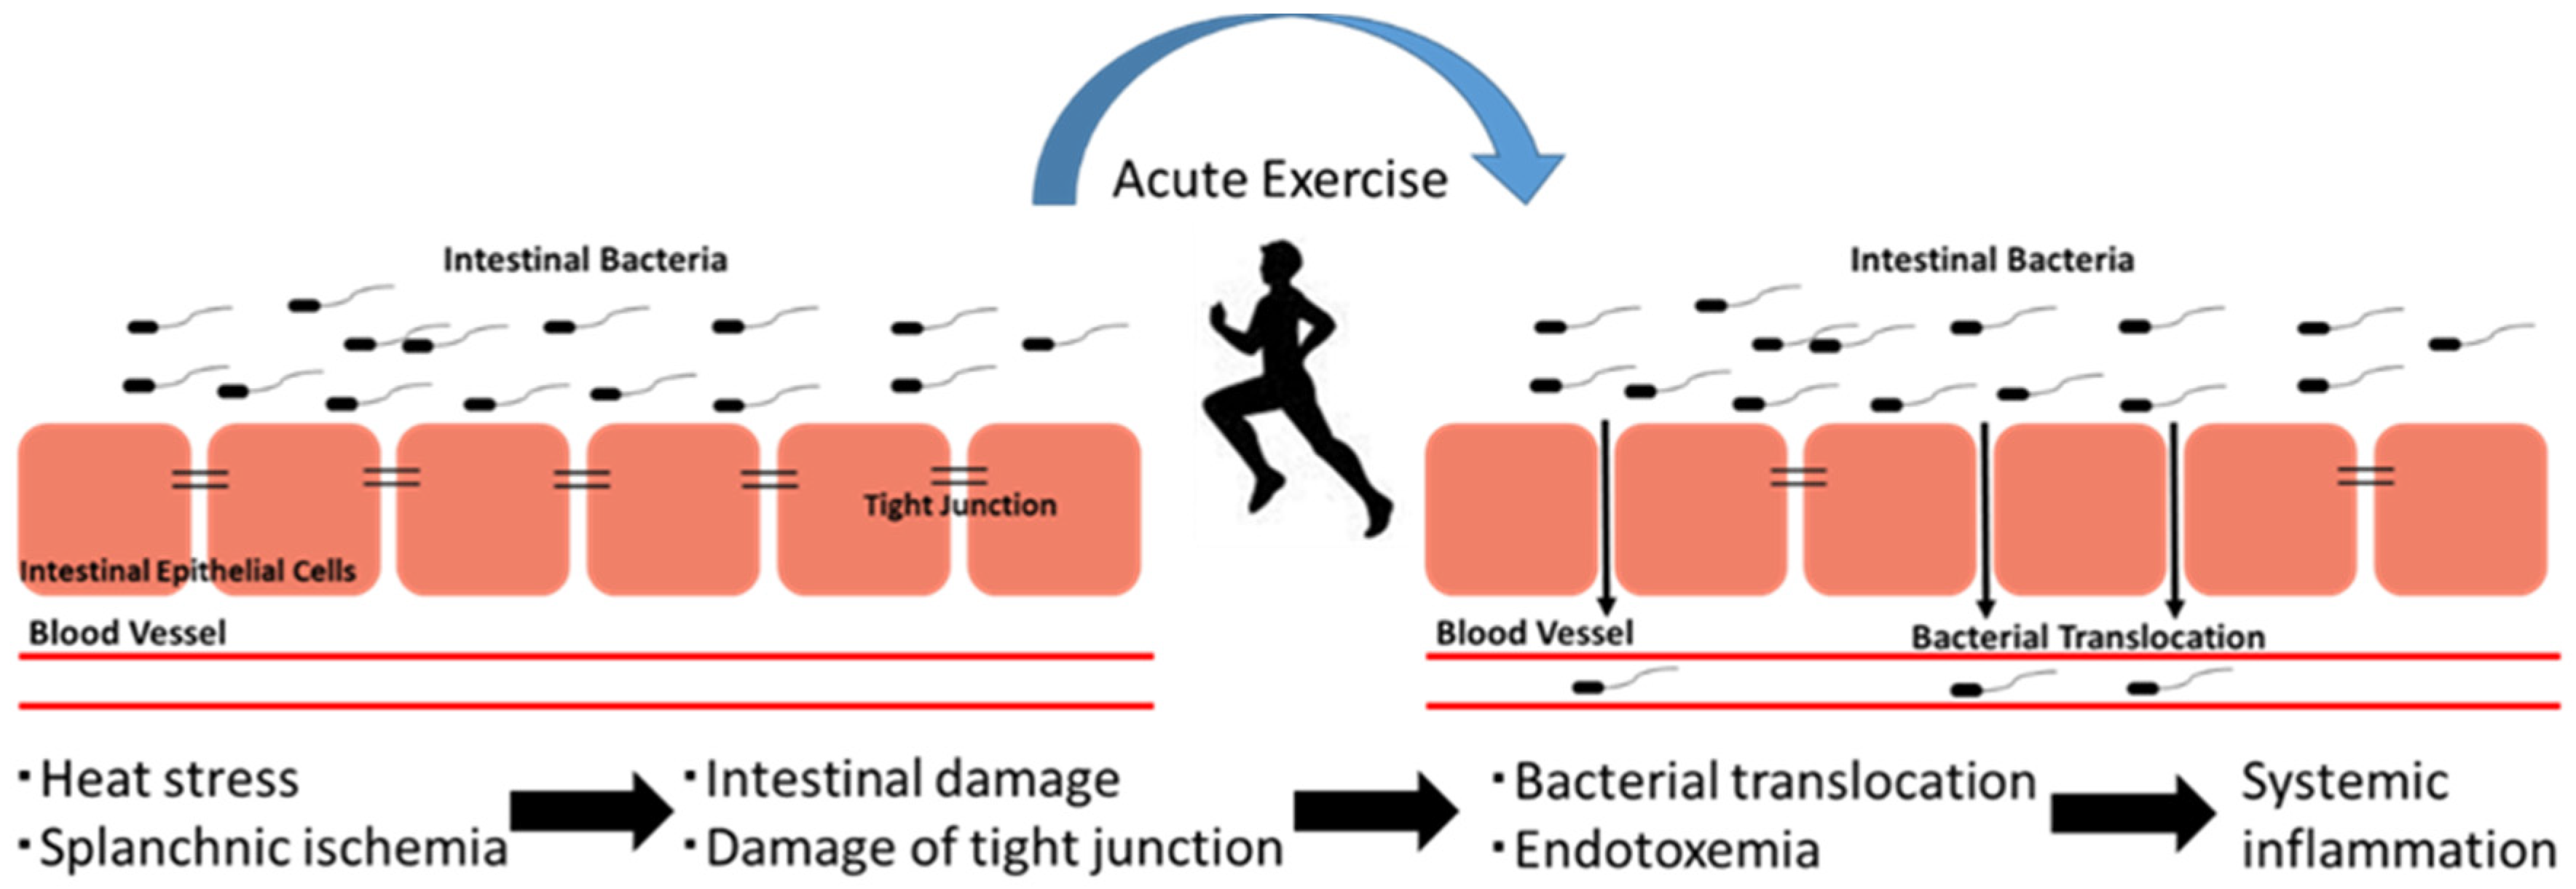 Reducing exercise-induced inflammation